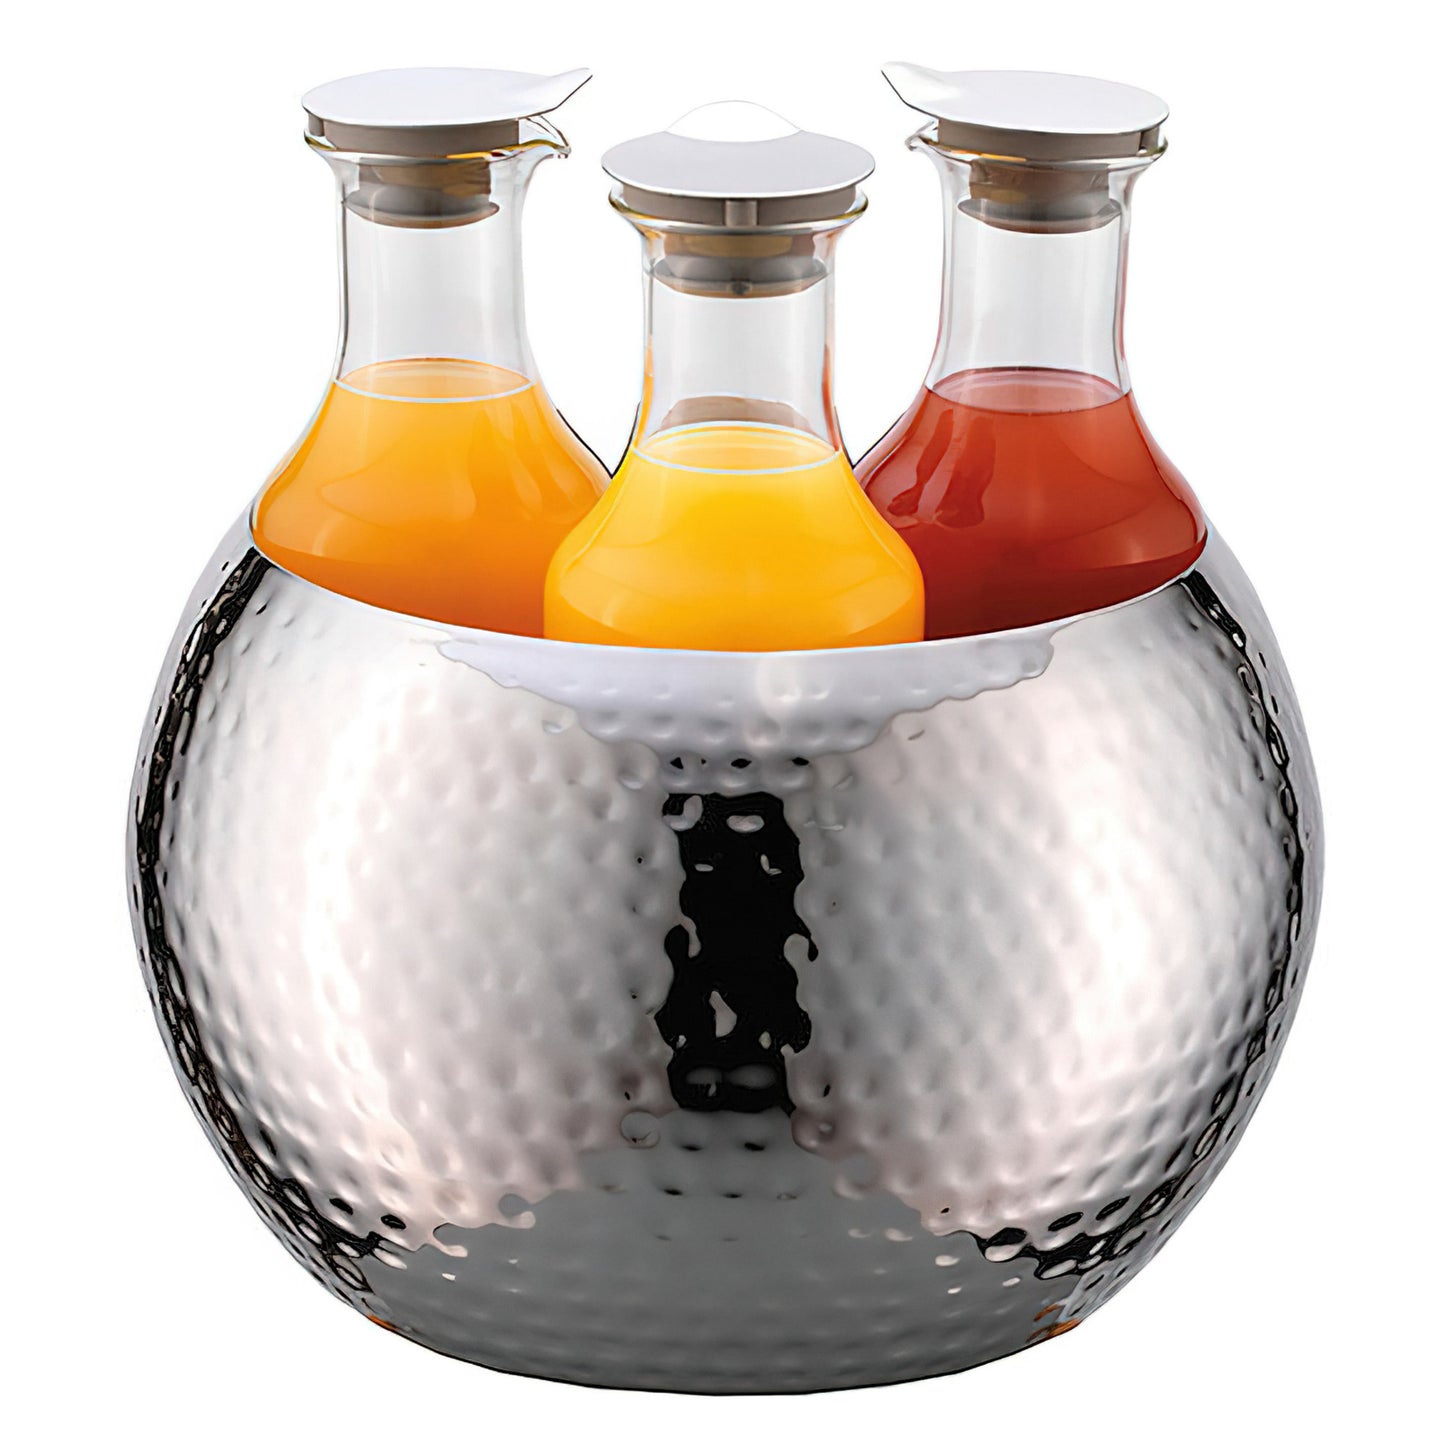 3-Carafe Hammered Stainless Steel Beverage Tub Set. Includes Double Wall Stainless Steel Tub with Removable Stainless Steel Crushed Ice Tube, 3 Tritan Plastic Carafes (1.3 qt. / 1.2L ea.) with Stainless Steel Lids. 12.6" x 12.6", 12.9" tall. FRILICH ESC03